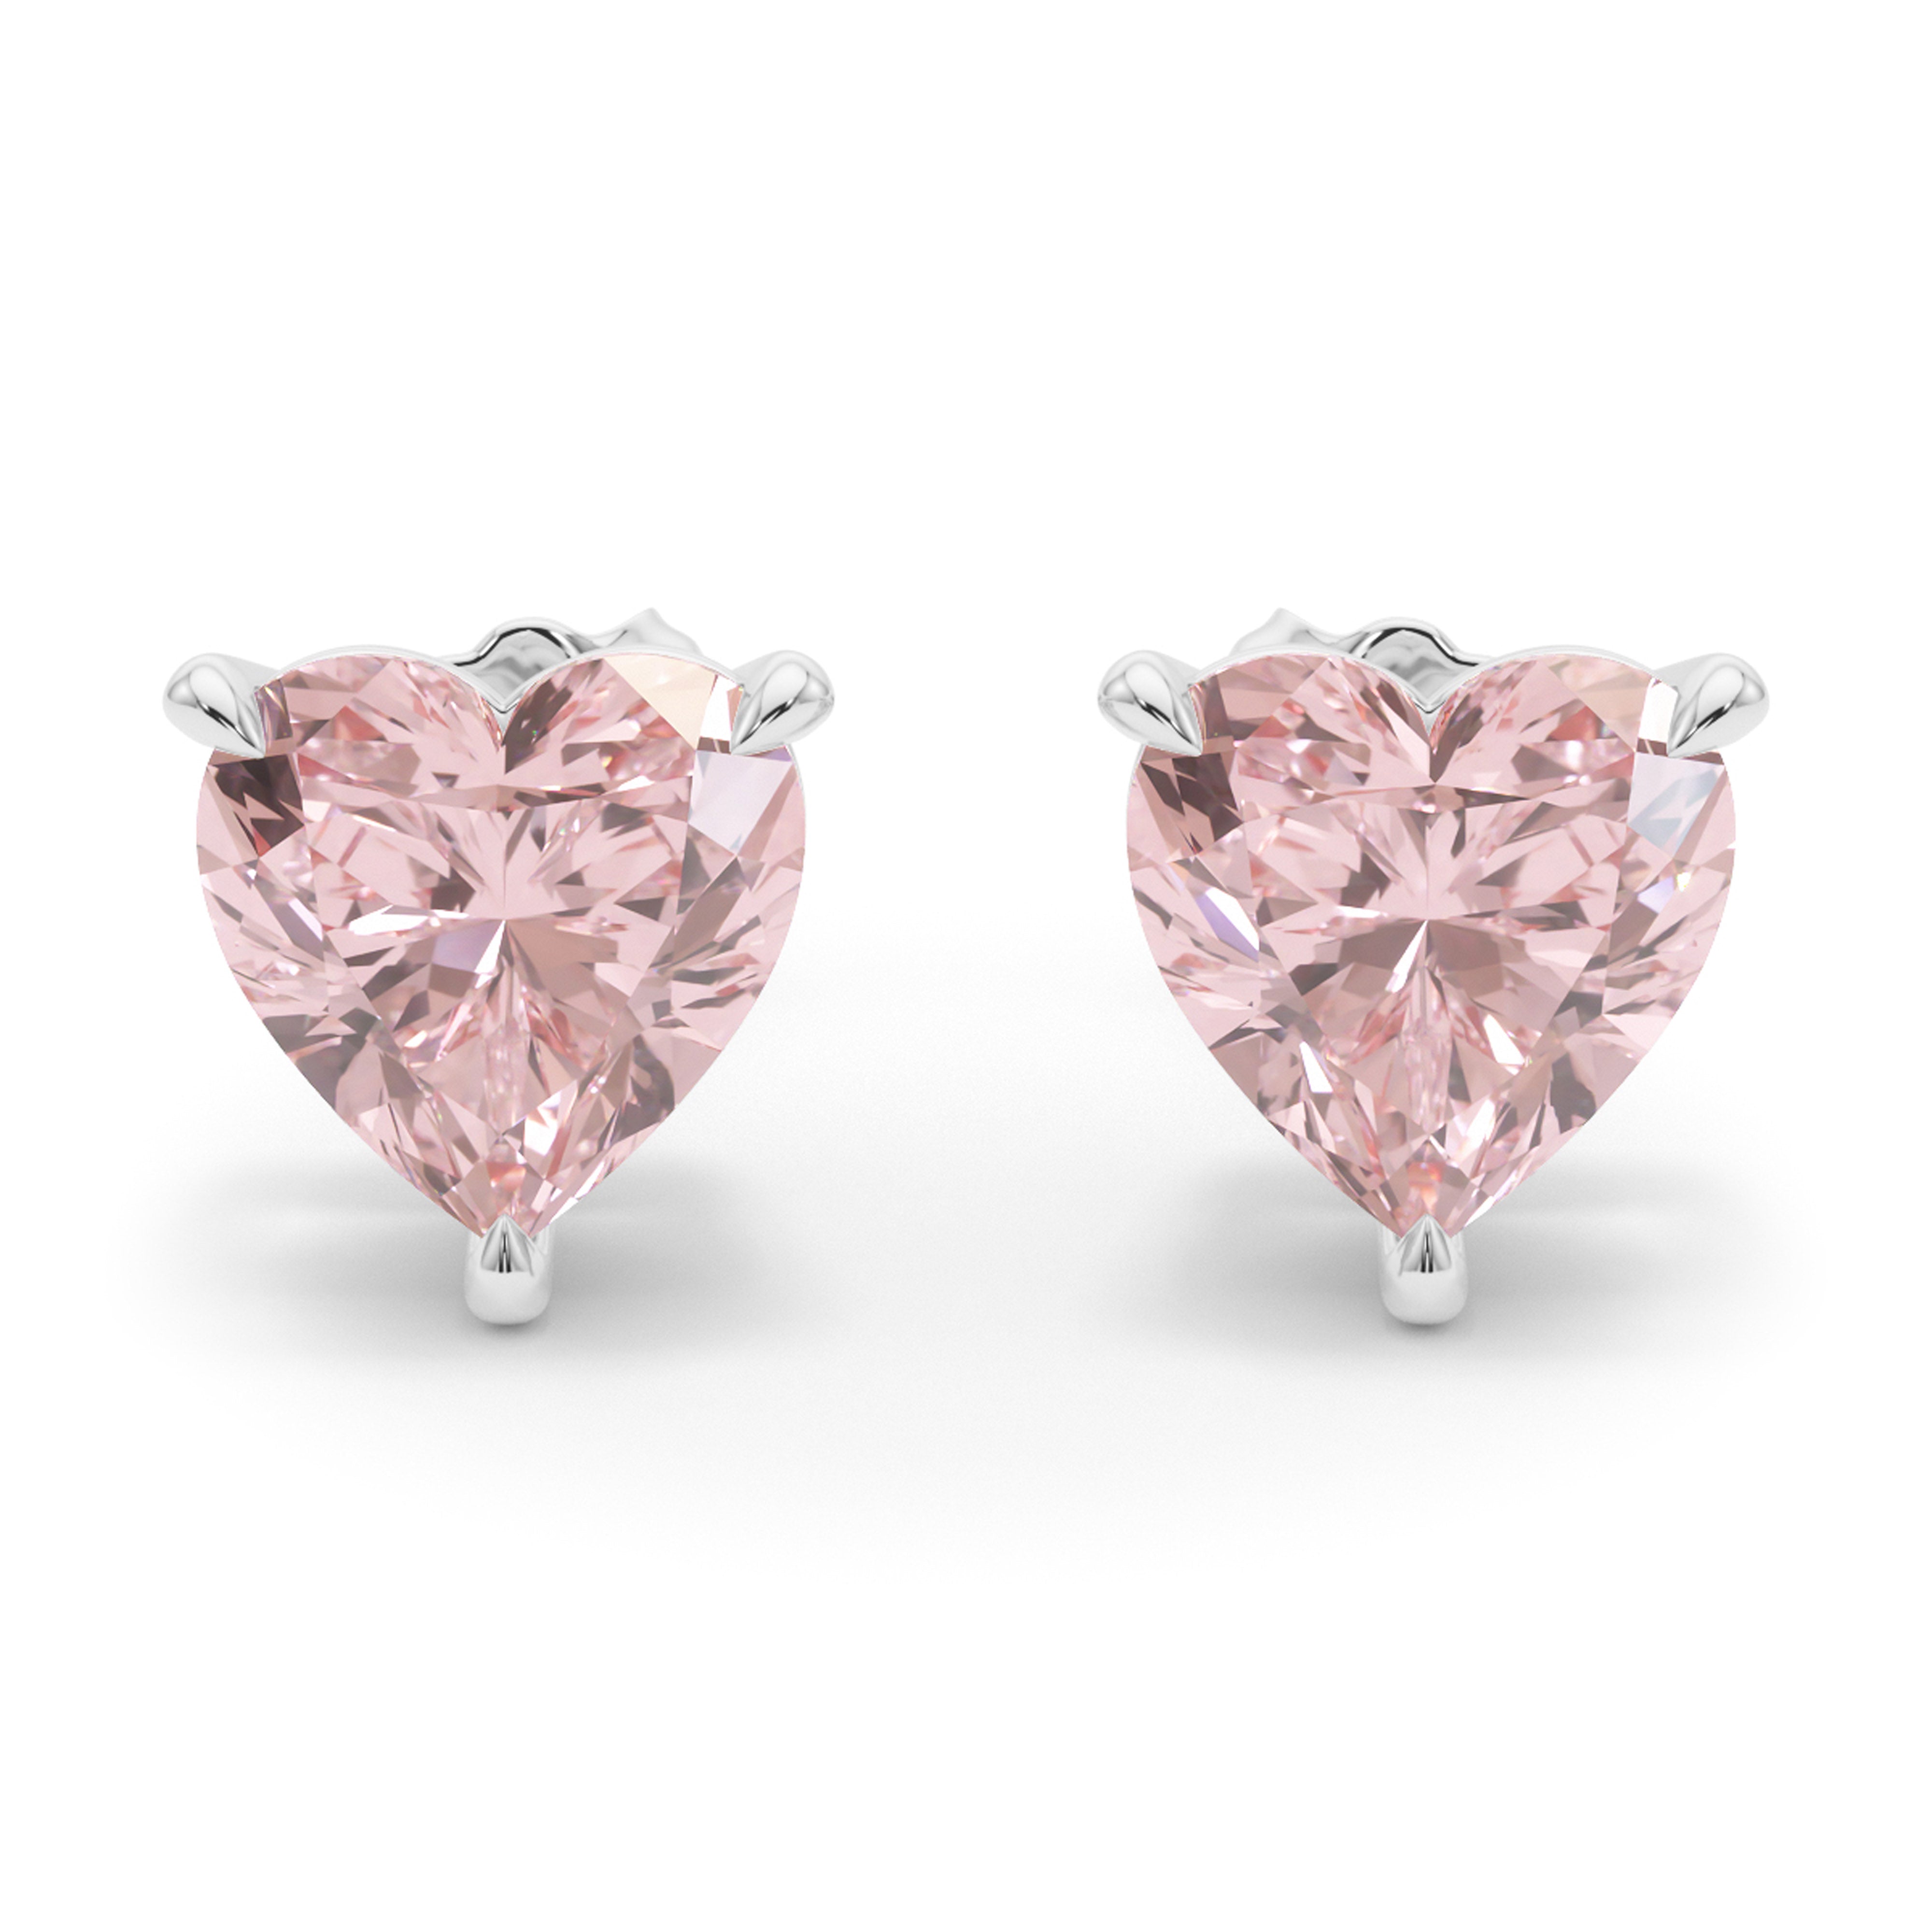 Gemology 101: Pink Diamonds (Why Have They Become So Rare